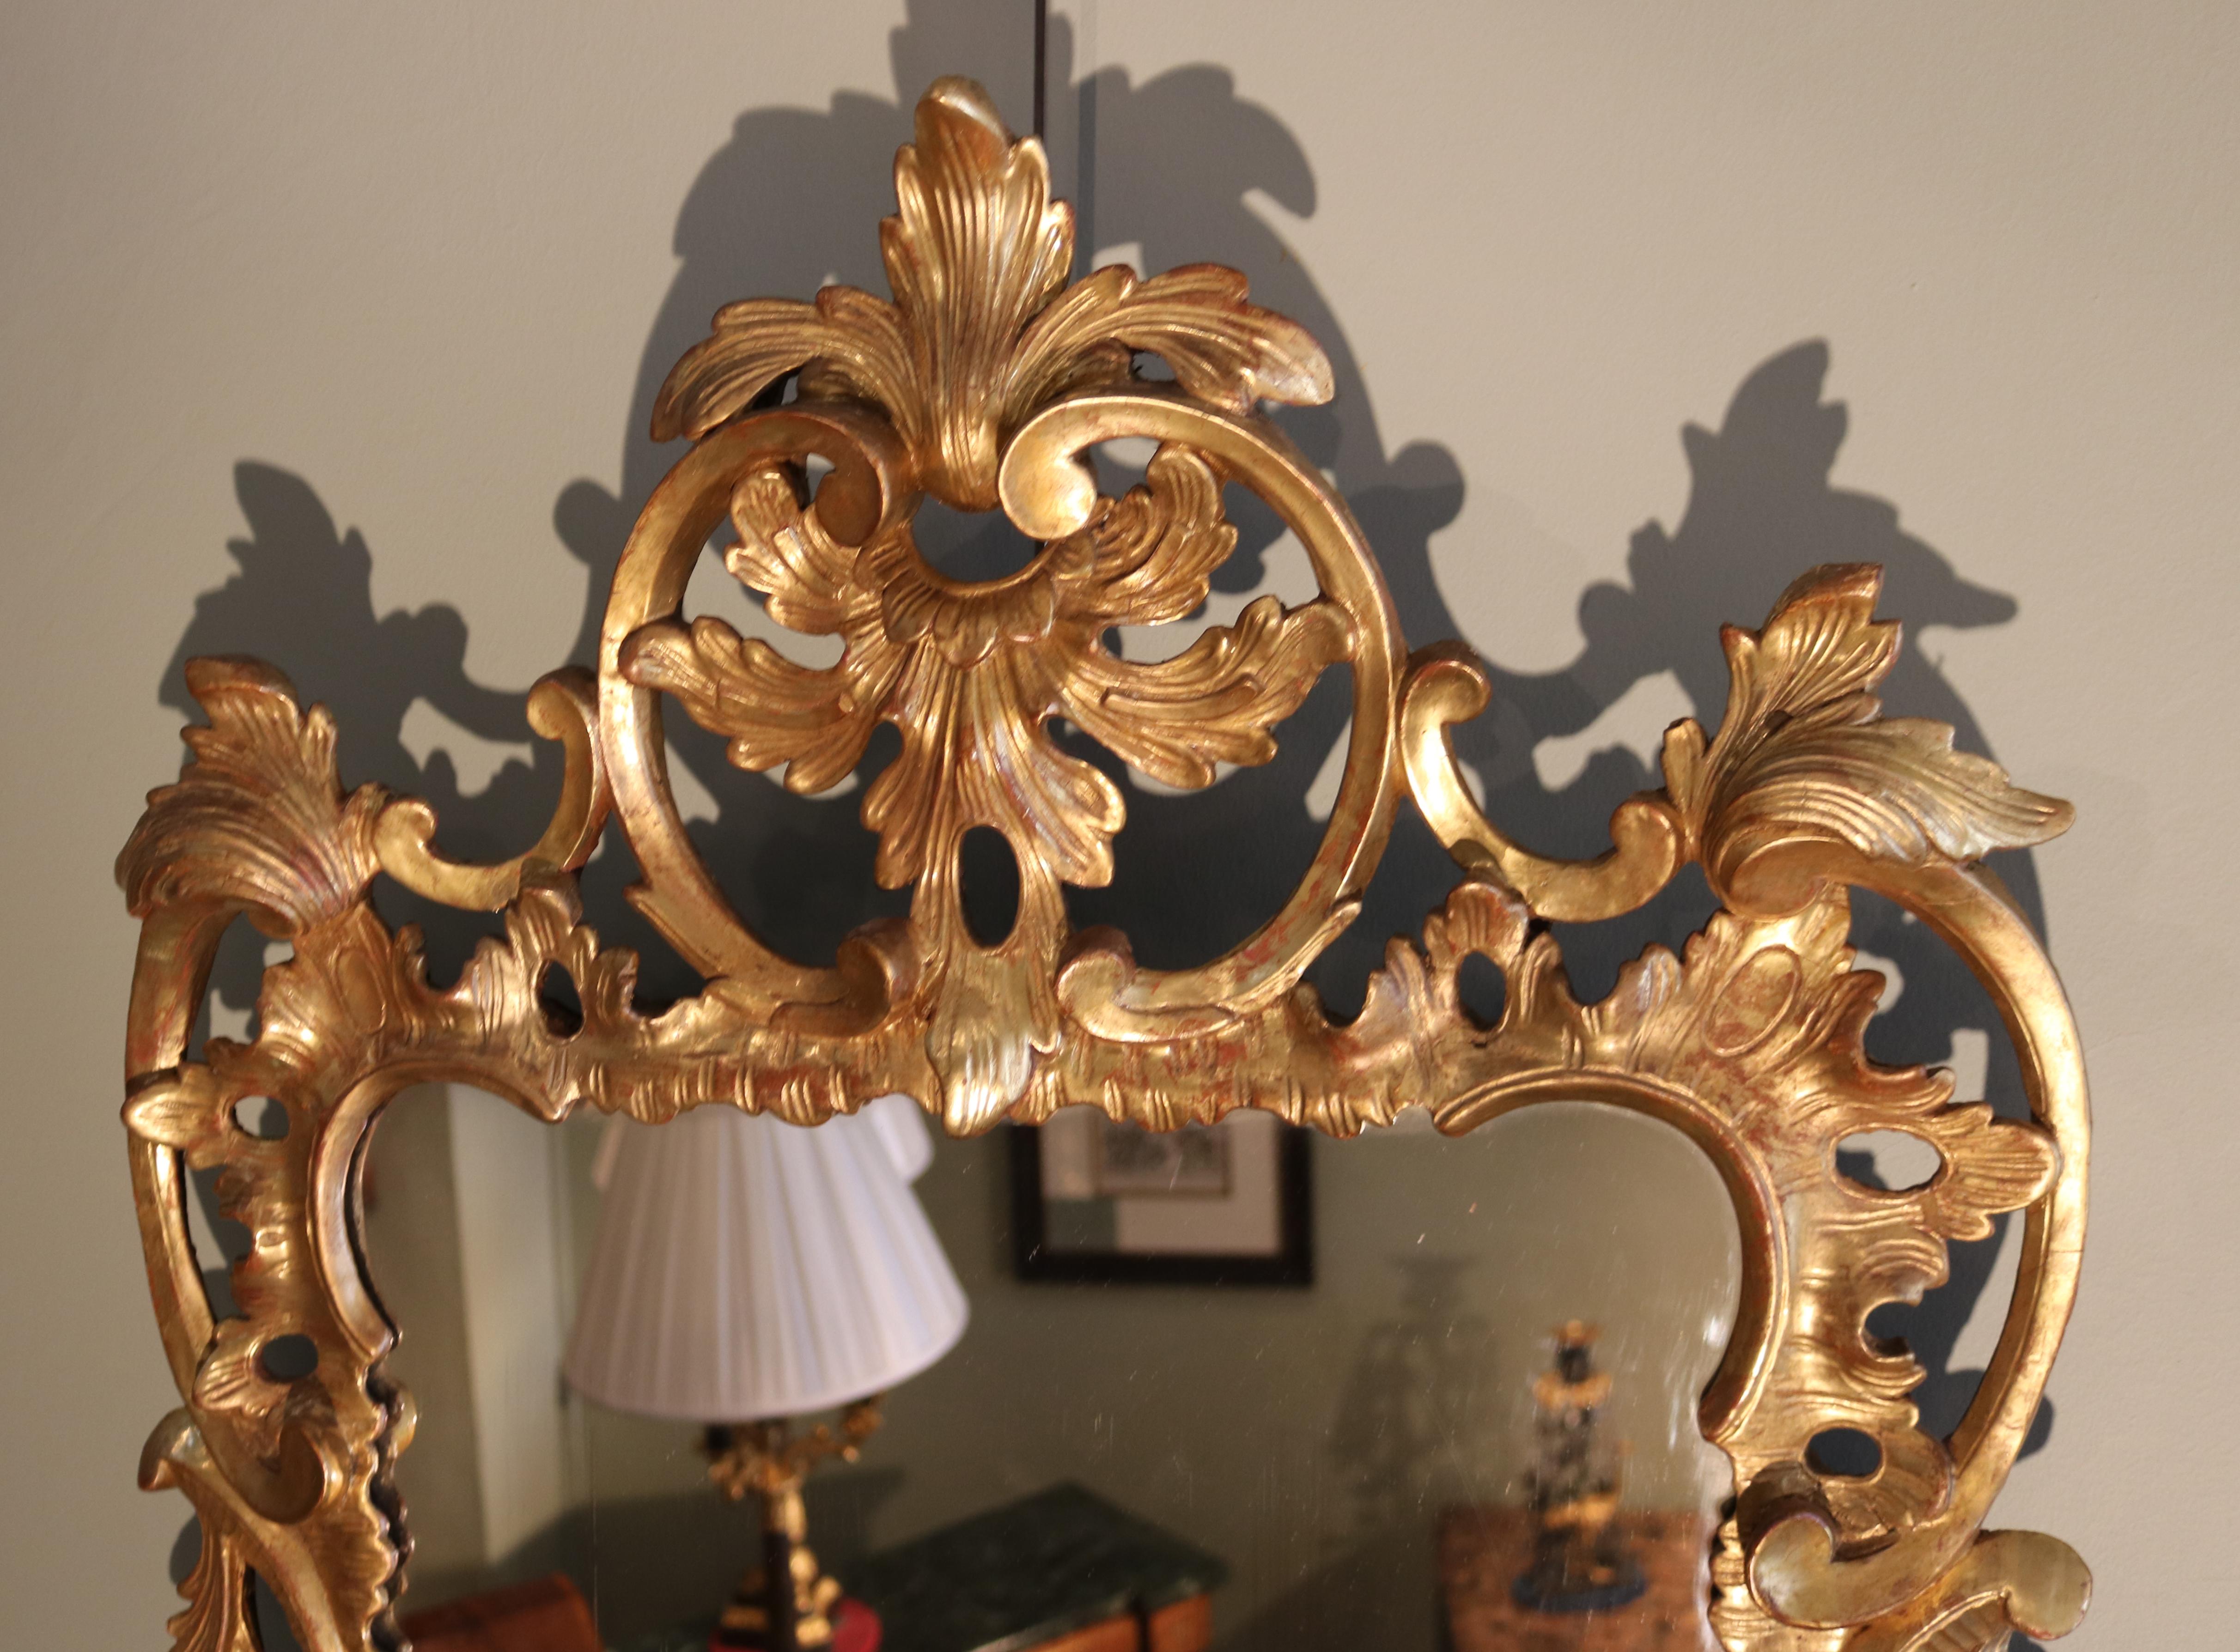 A mid-18th century Chippendale period mirror, of attractive small proportions, boldly carved throughout with c-scrolls, acanthus leaves and fruit and flowers, having cartouche decorated top and bottom.